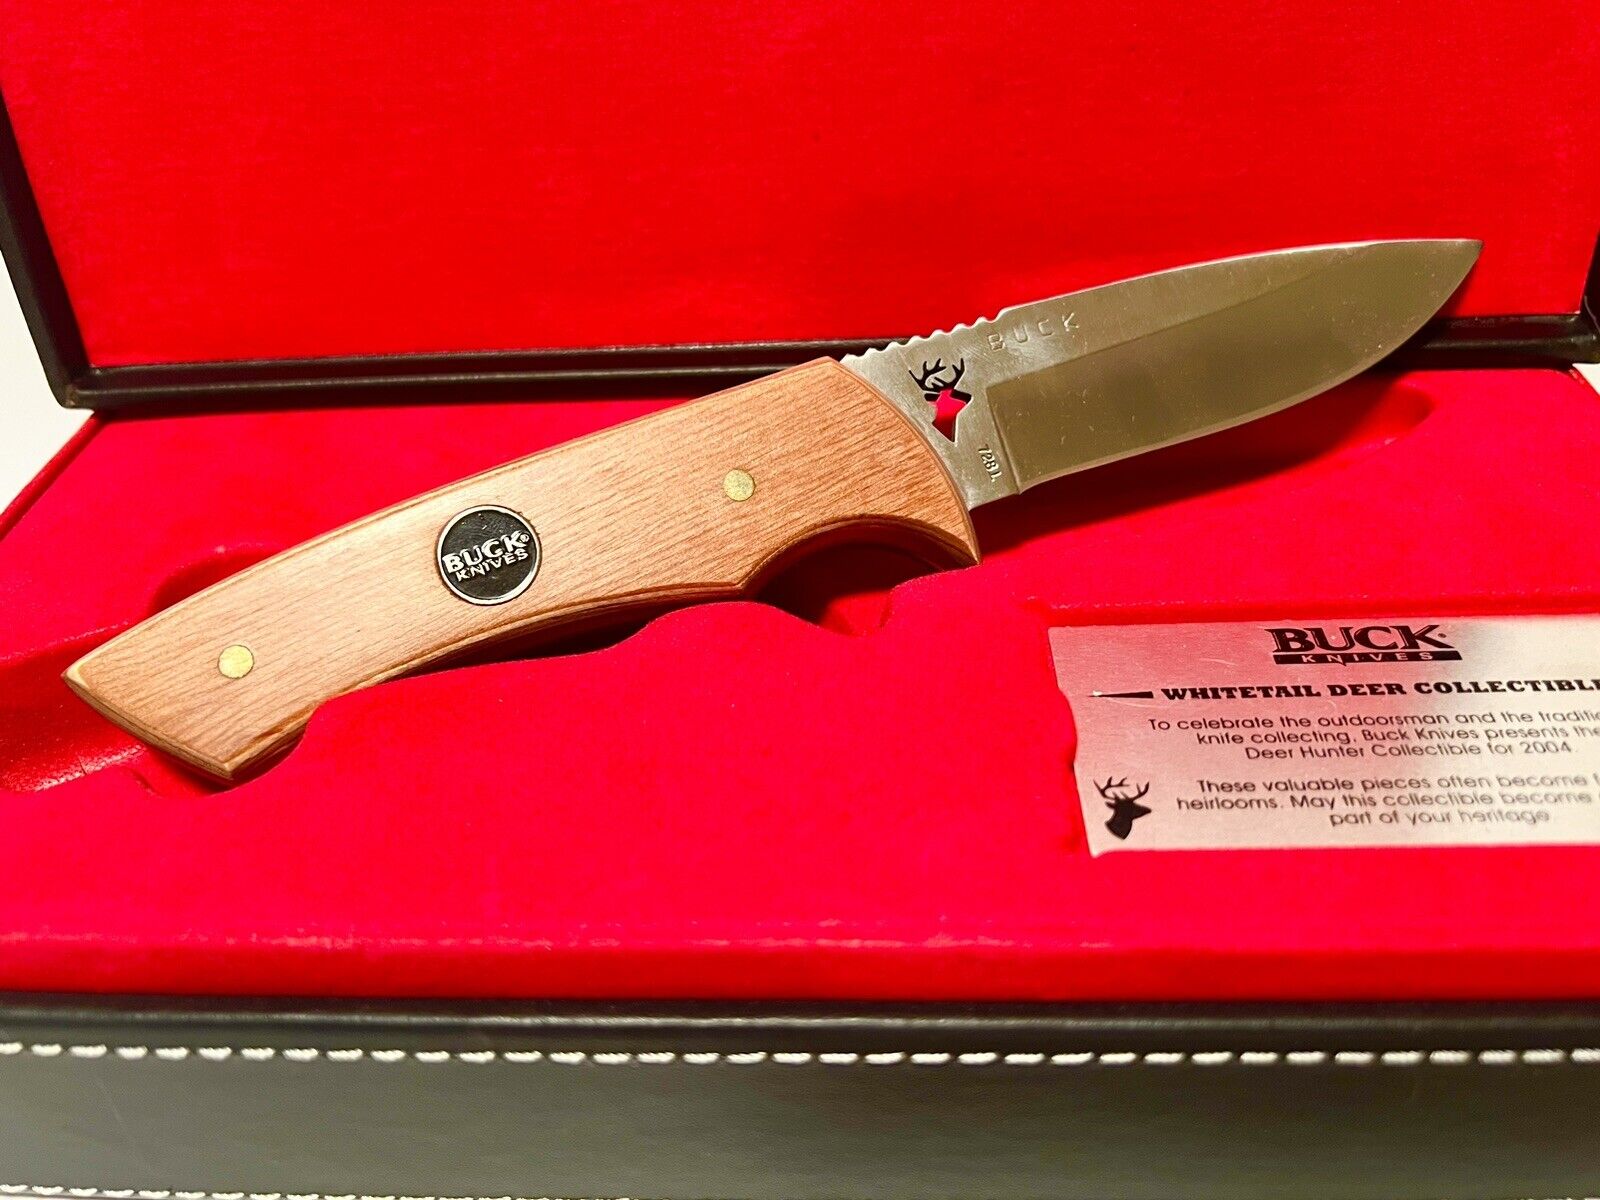 BUCK KNIVES 728 WhiteTail Deer Collectible Knife With Presentation Box